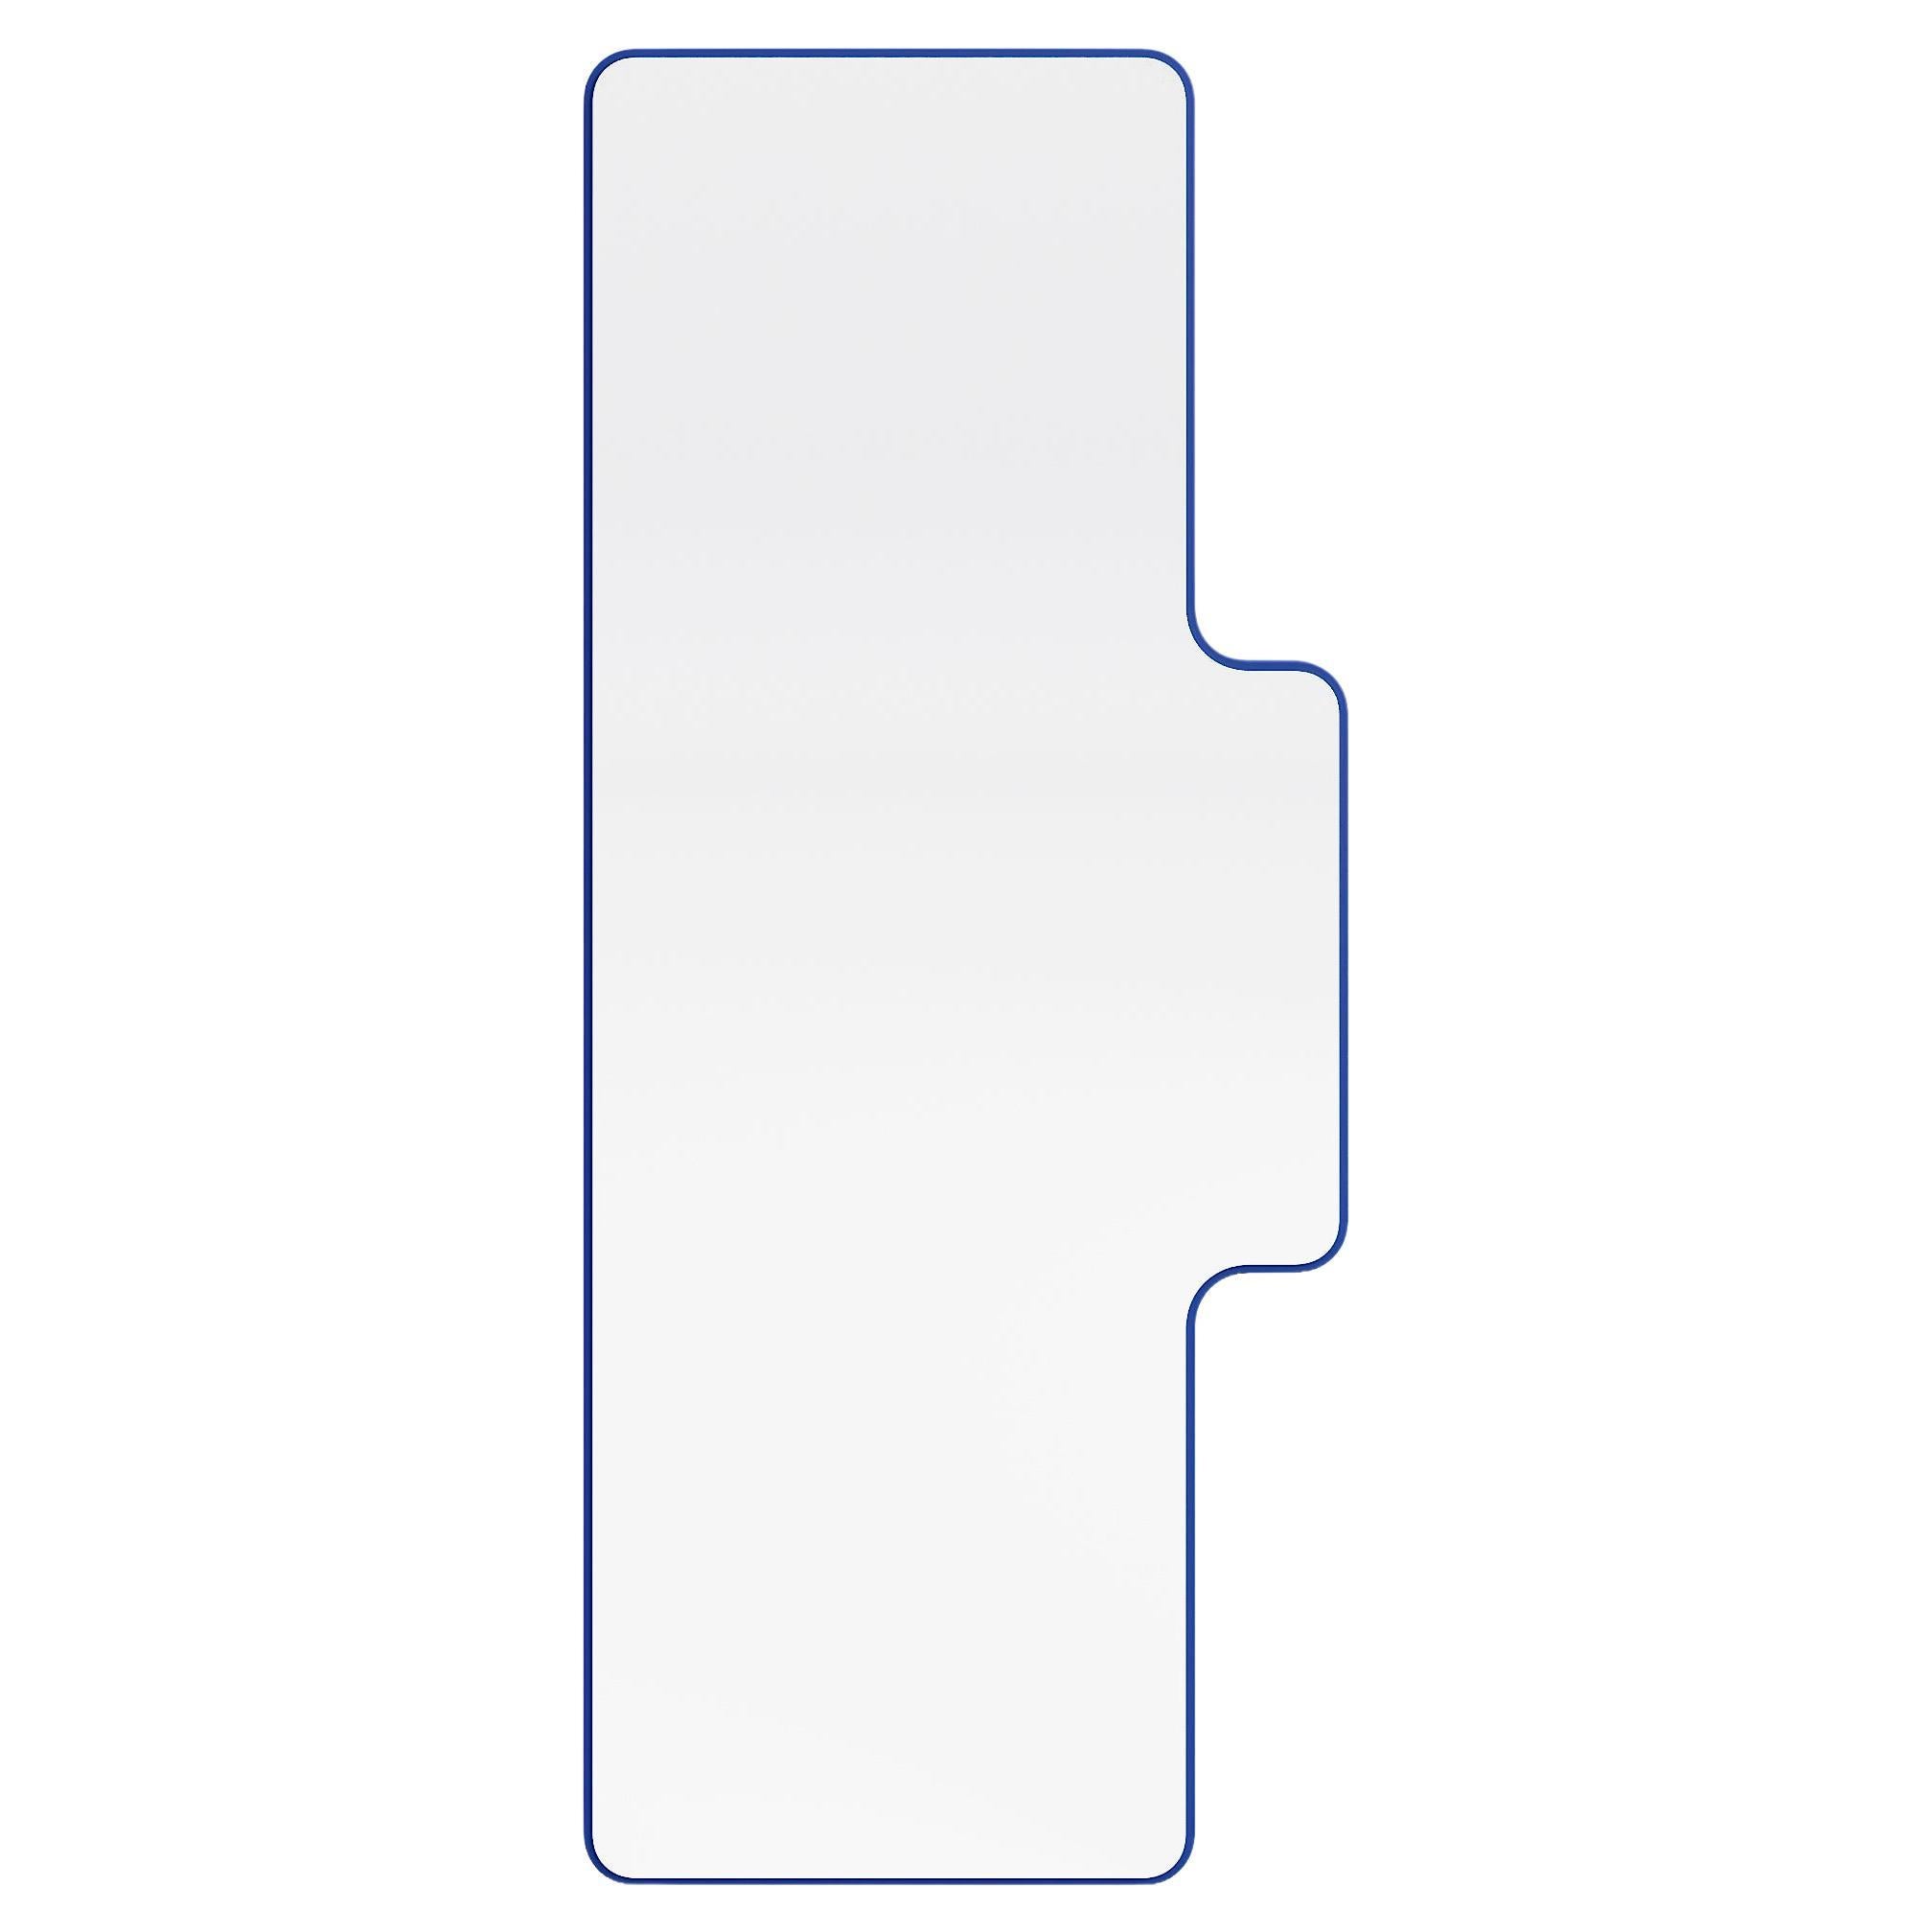 "Loveself 02" Full Length Mirror (any color) by Oitoproducts